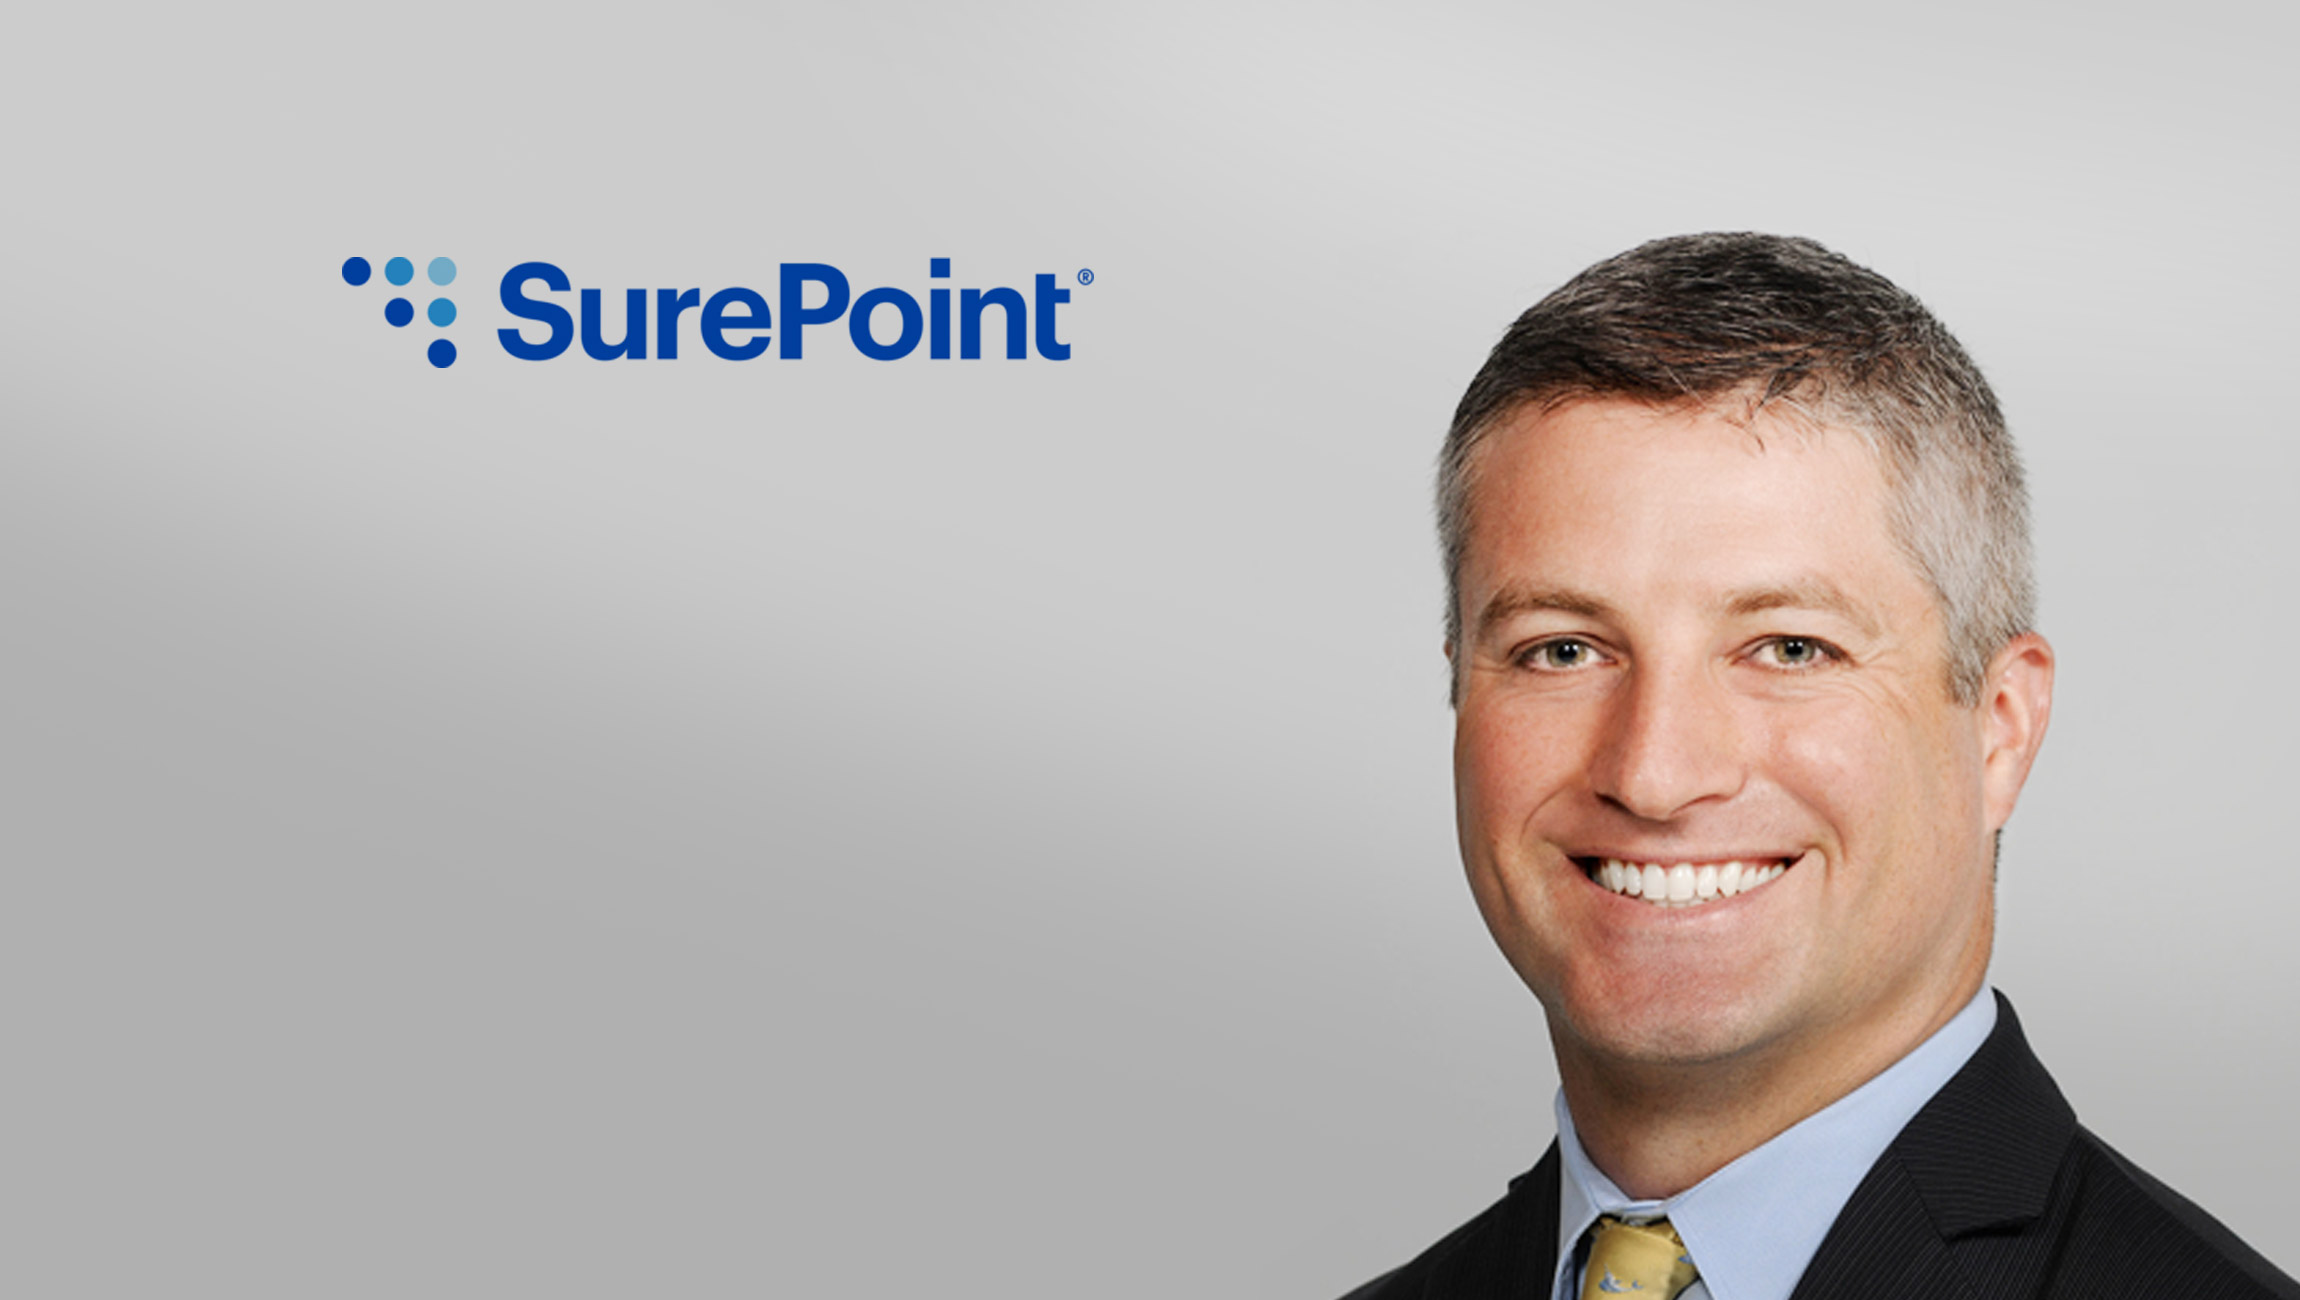 SurePoint Technologies Appoints Tim Radaich as Chief Revenue Officer to Grow New Paths to Revenue and Scale Go-to-Market Strategy